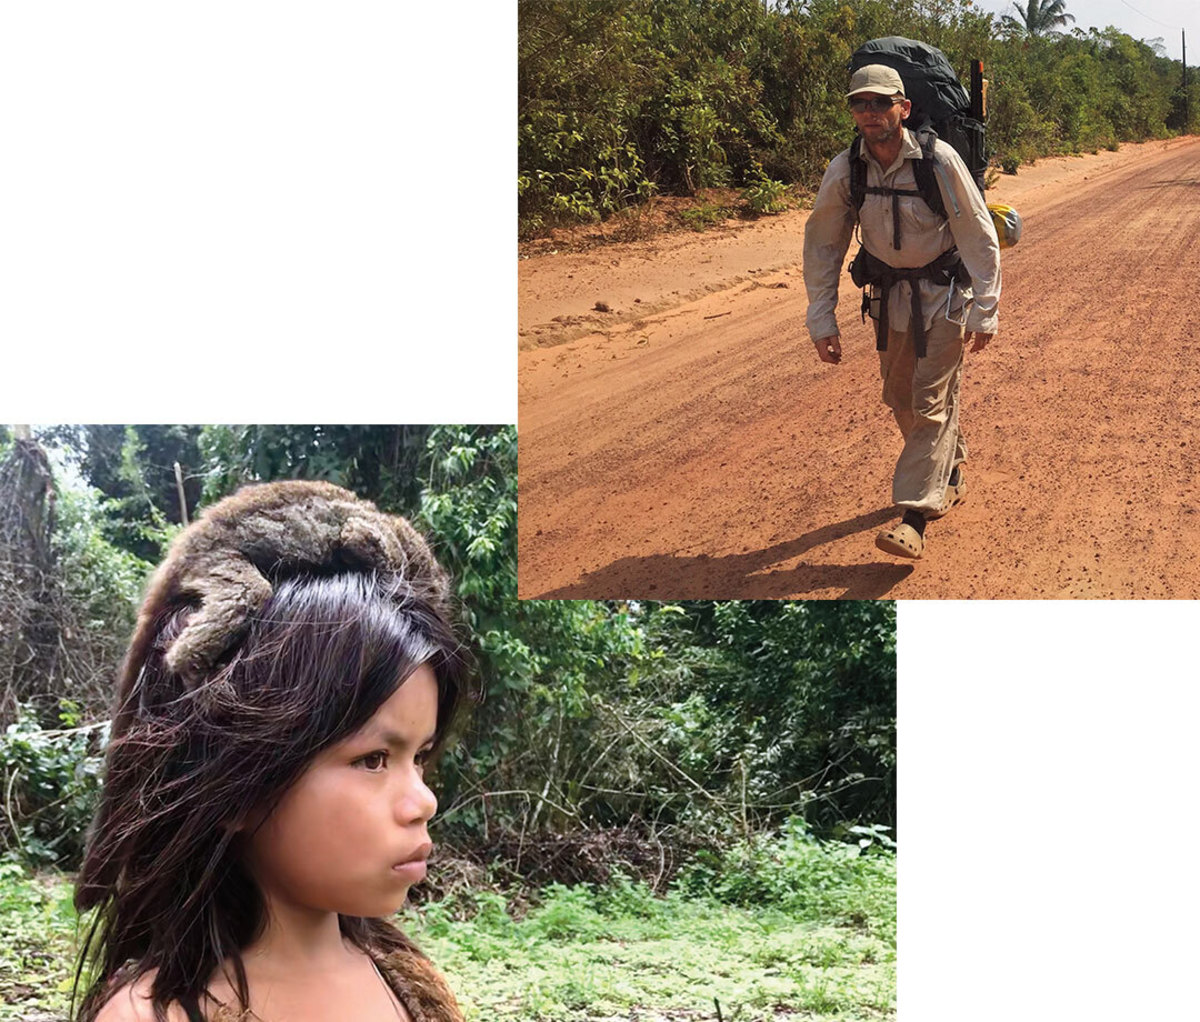 Indigenous child with pet monkey asleep on her head and photo of man walking on dirt path